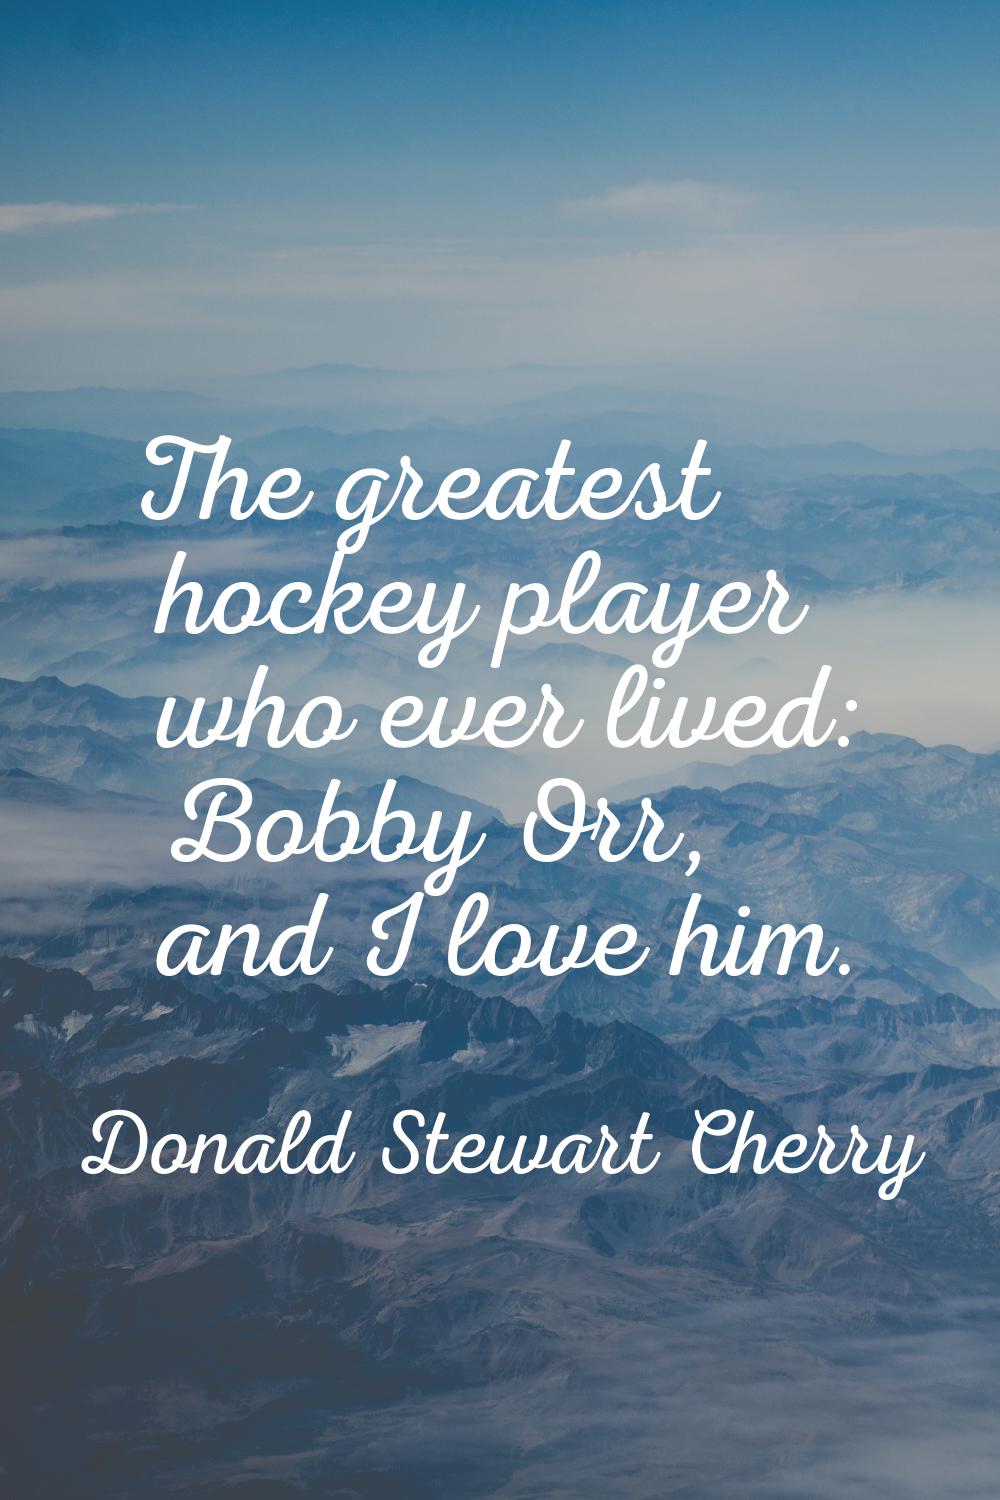 The greatest hockey player who ever lived: Bobby Orr, and I love him.